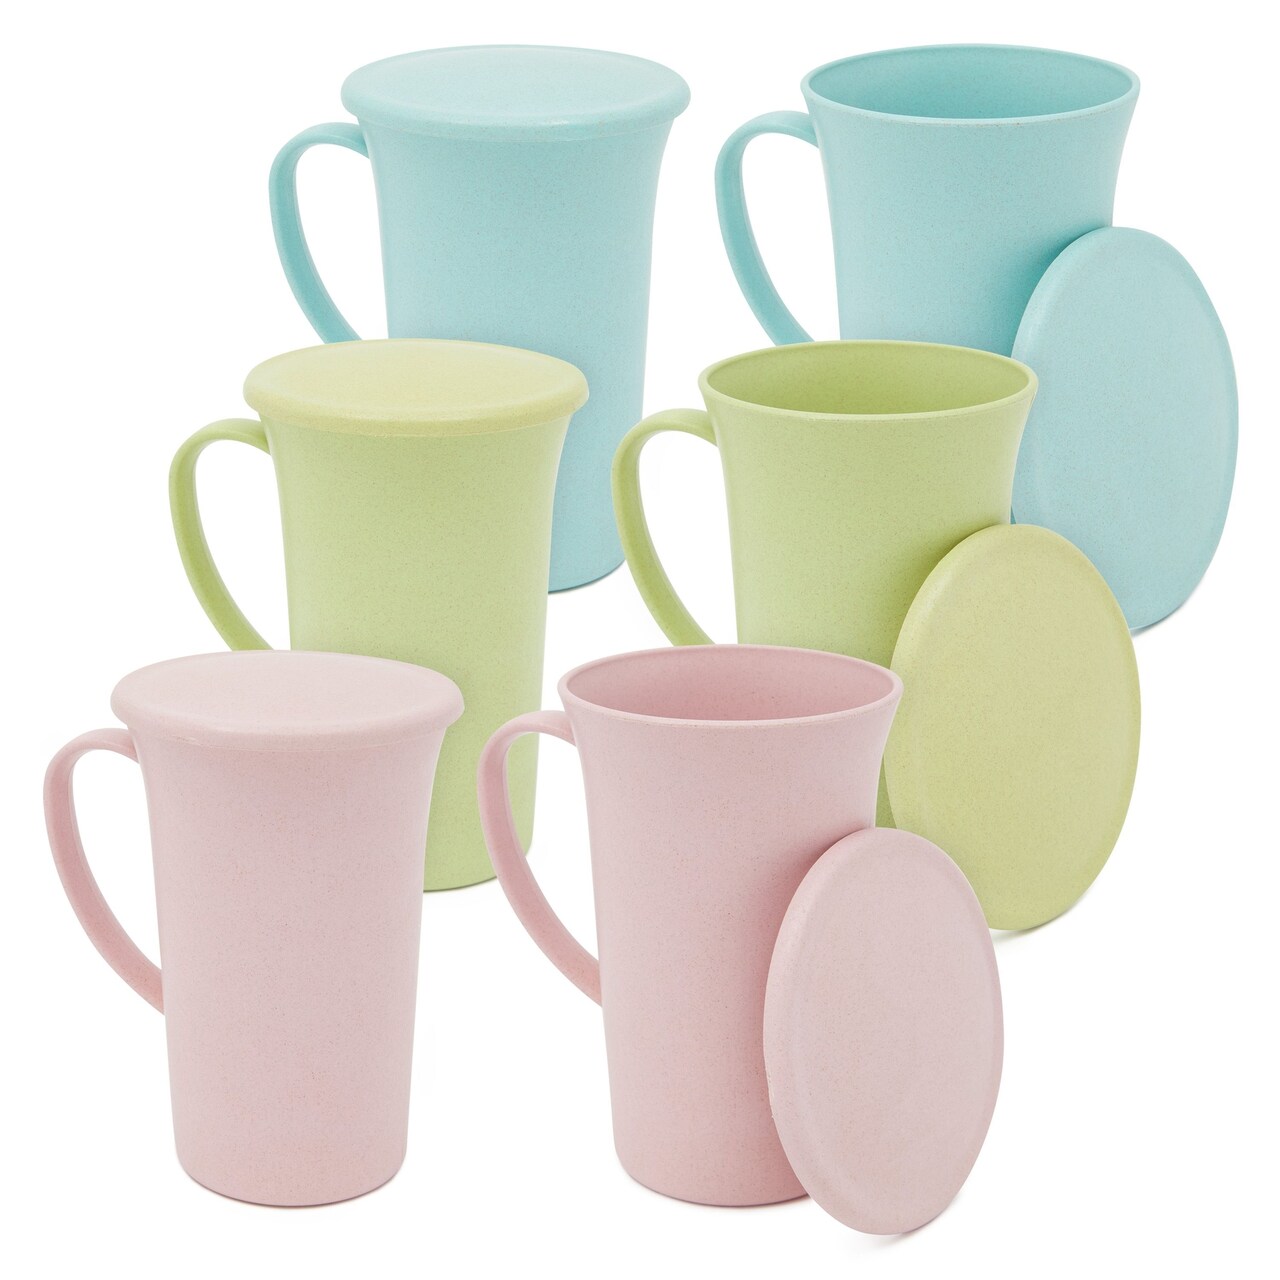 Wheat Straw Mugs with Handle, Set of 6 Unbreakable Coffee Cups with Lids (3 Colors, 15 oz)